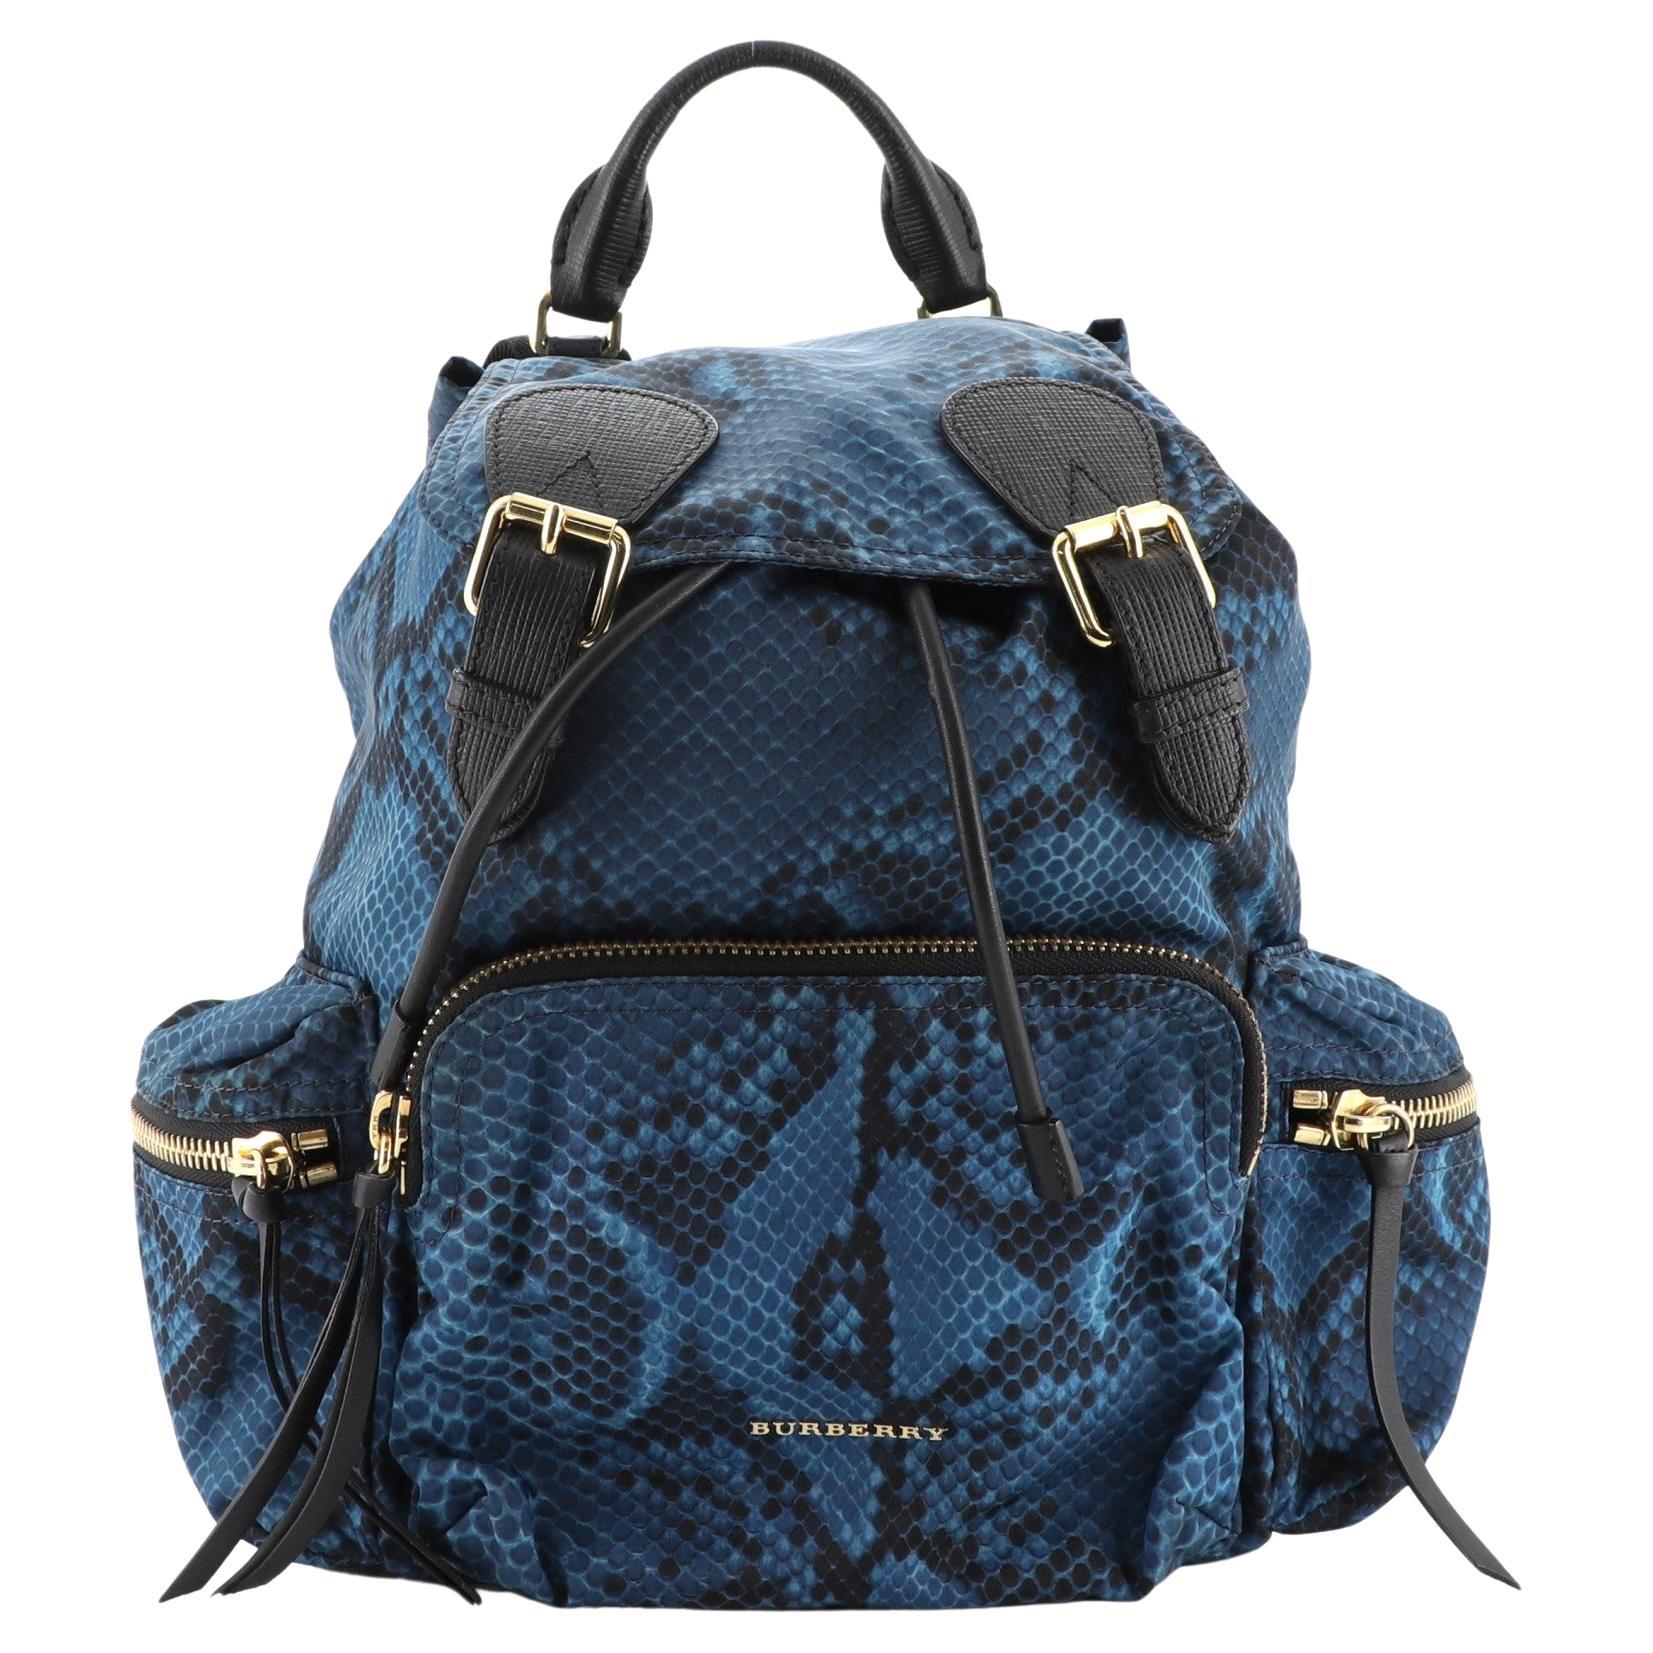 Burberry Rucksack Backpack Snake Print Nylon with Leather Large